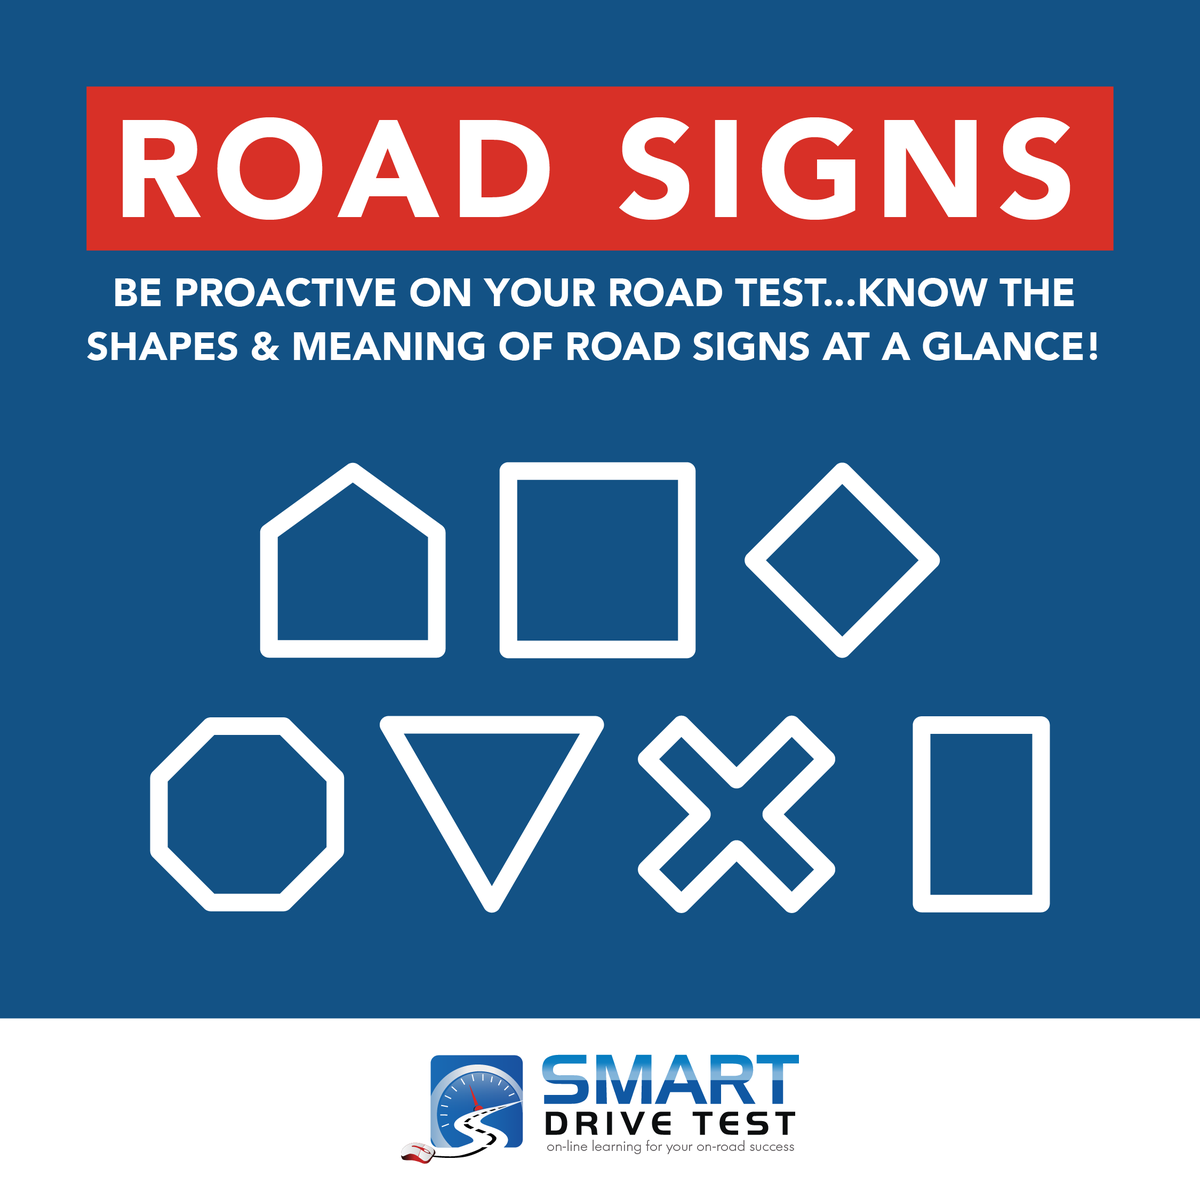 DON'T FAIL YOUR DRIVER'S TEST COURSE PKG LEARN MORE HERE: smartdrivetest.com/new-drivers/sm… The Winter & Defensive Driving Smart Courses are included in this awesome course package. Practice in and around the DMV where you'll be taking your test so you know the different traffic signs.